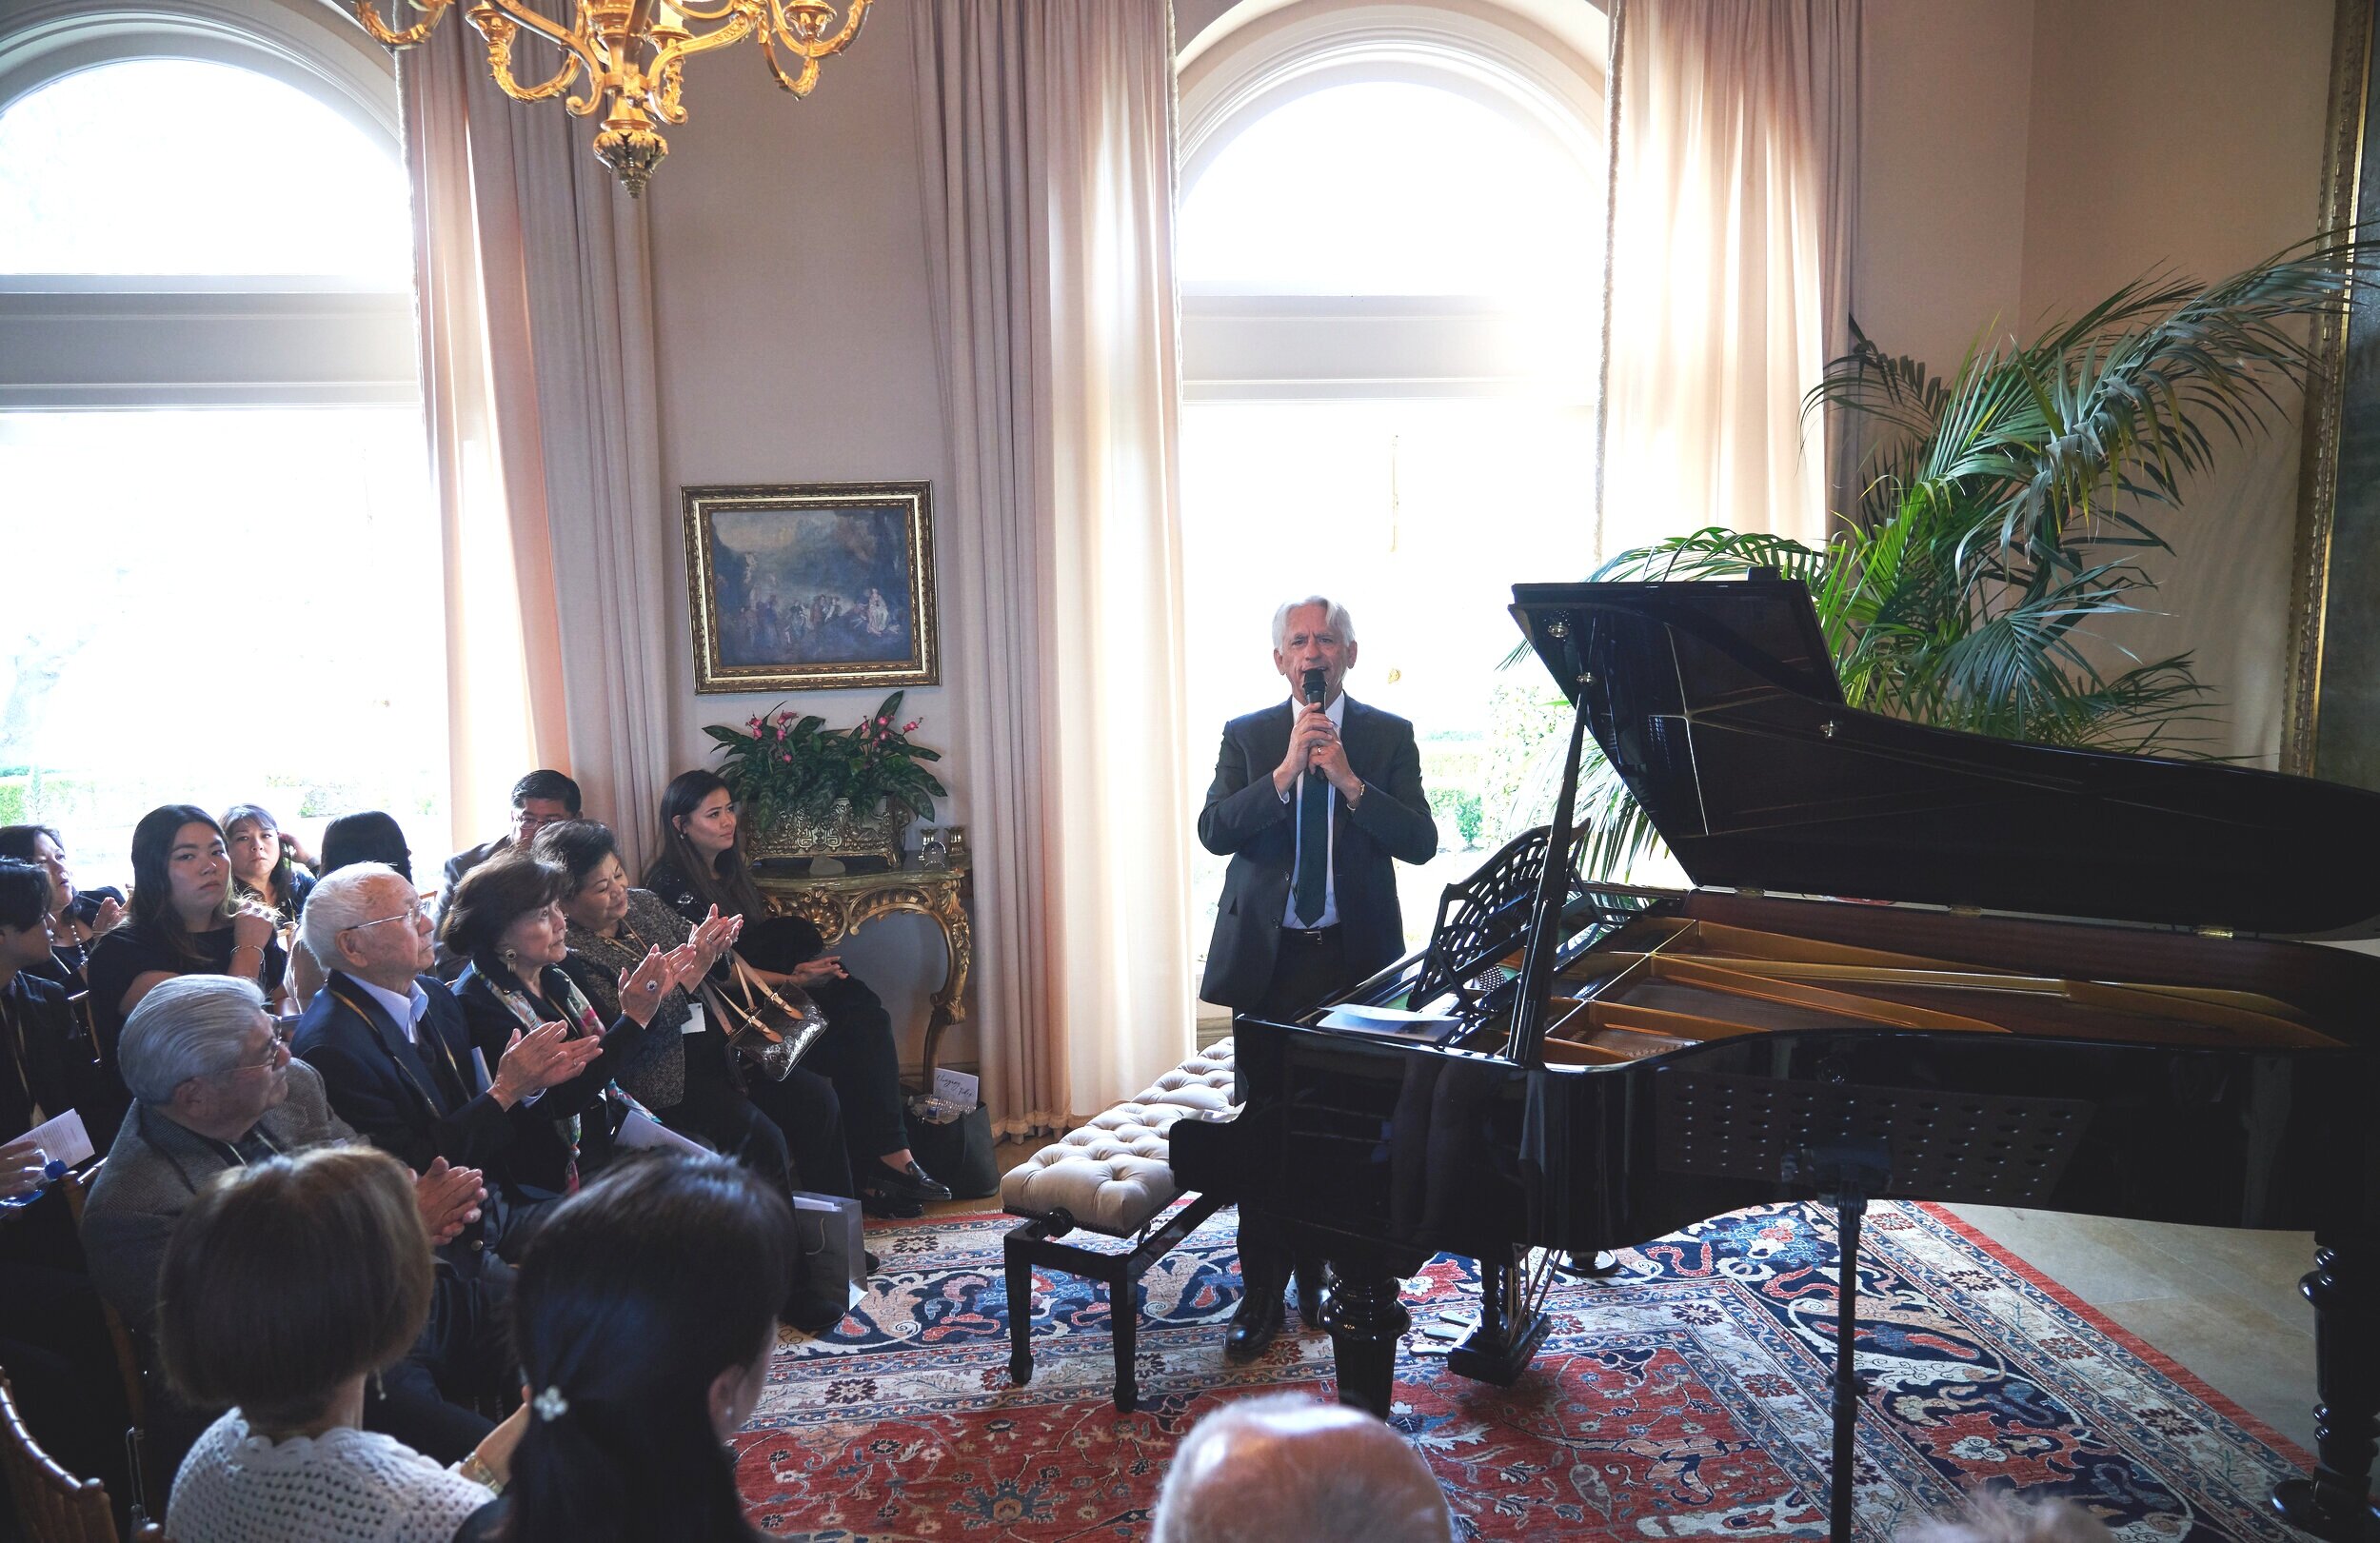 A man with white hair stands next to the piano as he speaks with a microphone to a seated group.